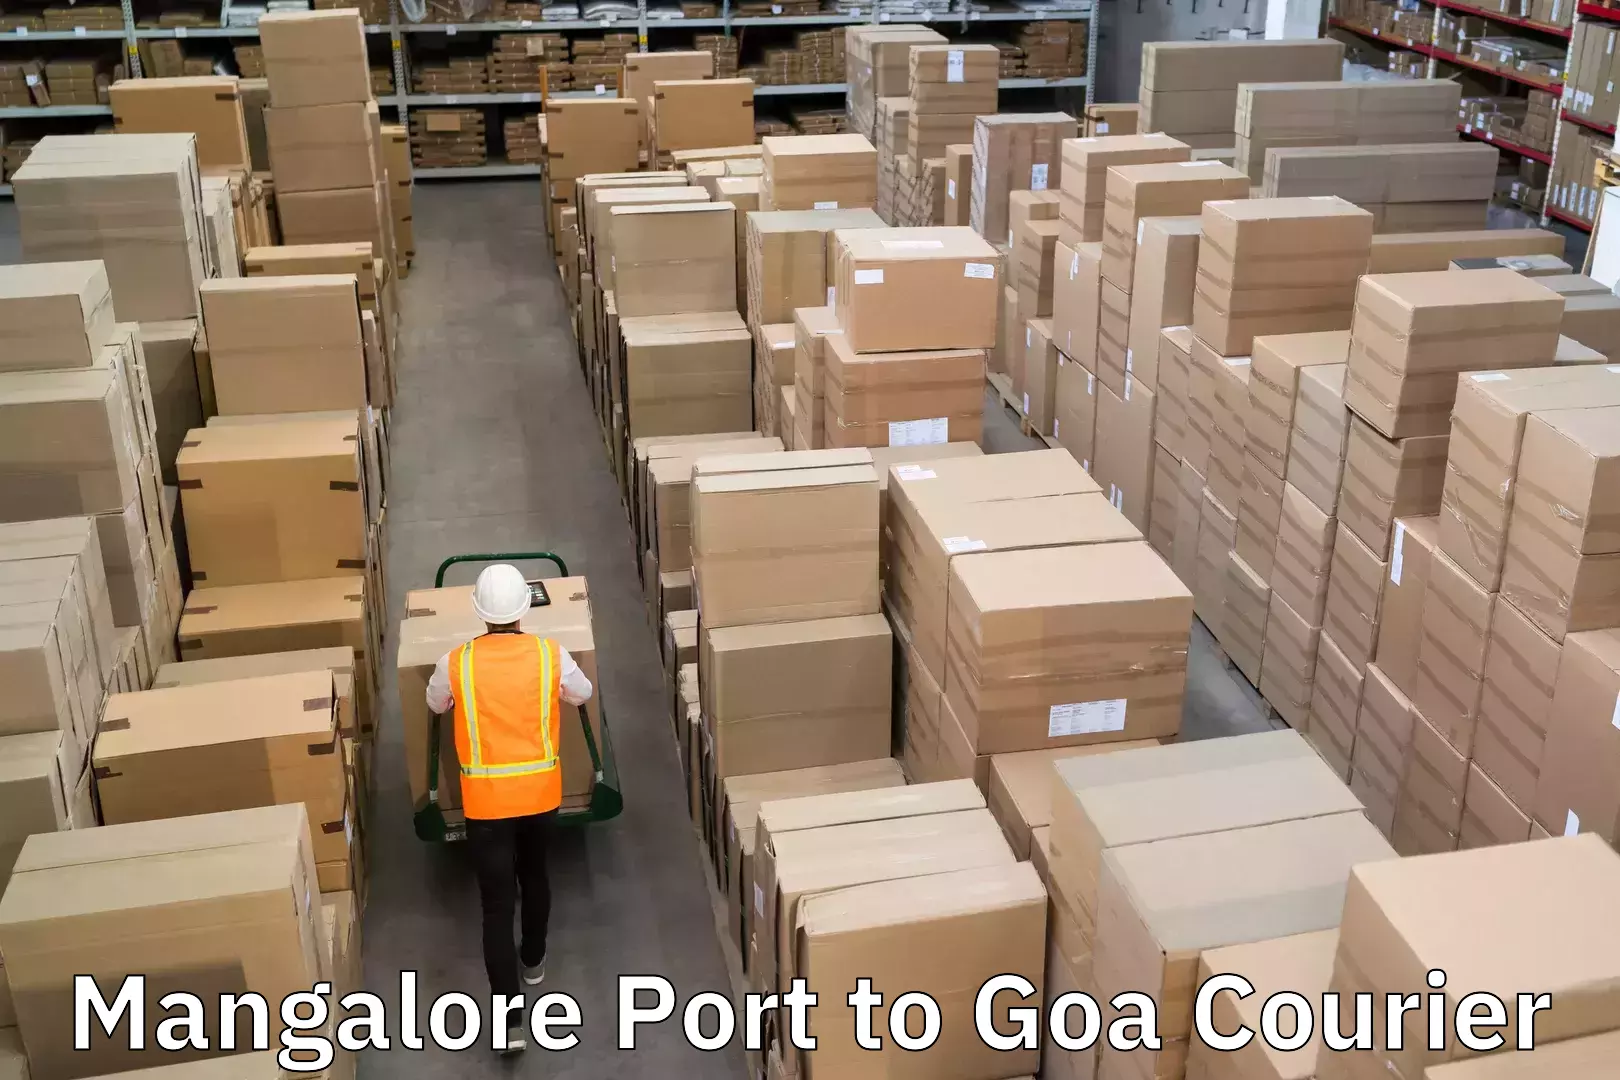 Fast delivery service Mangalore Port to Goa